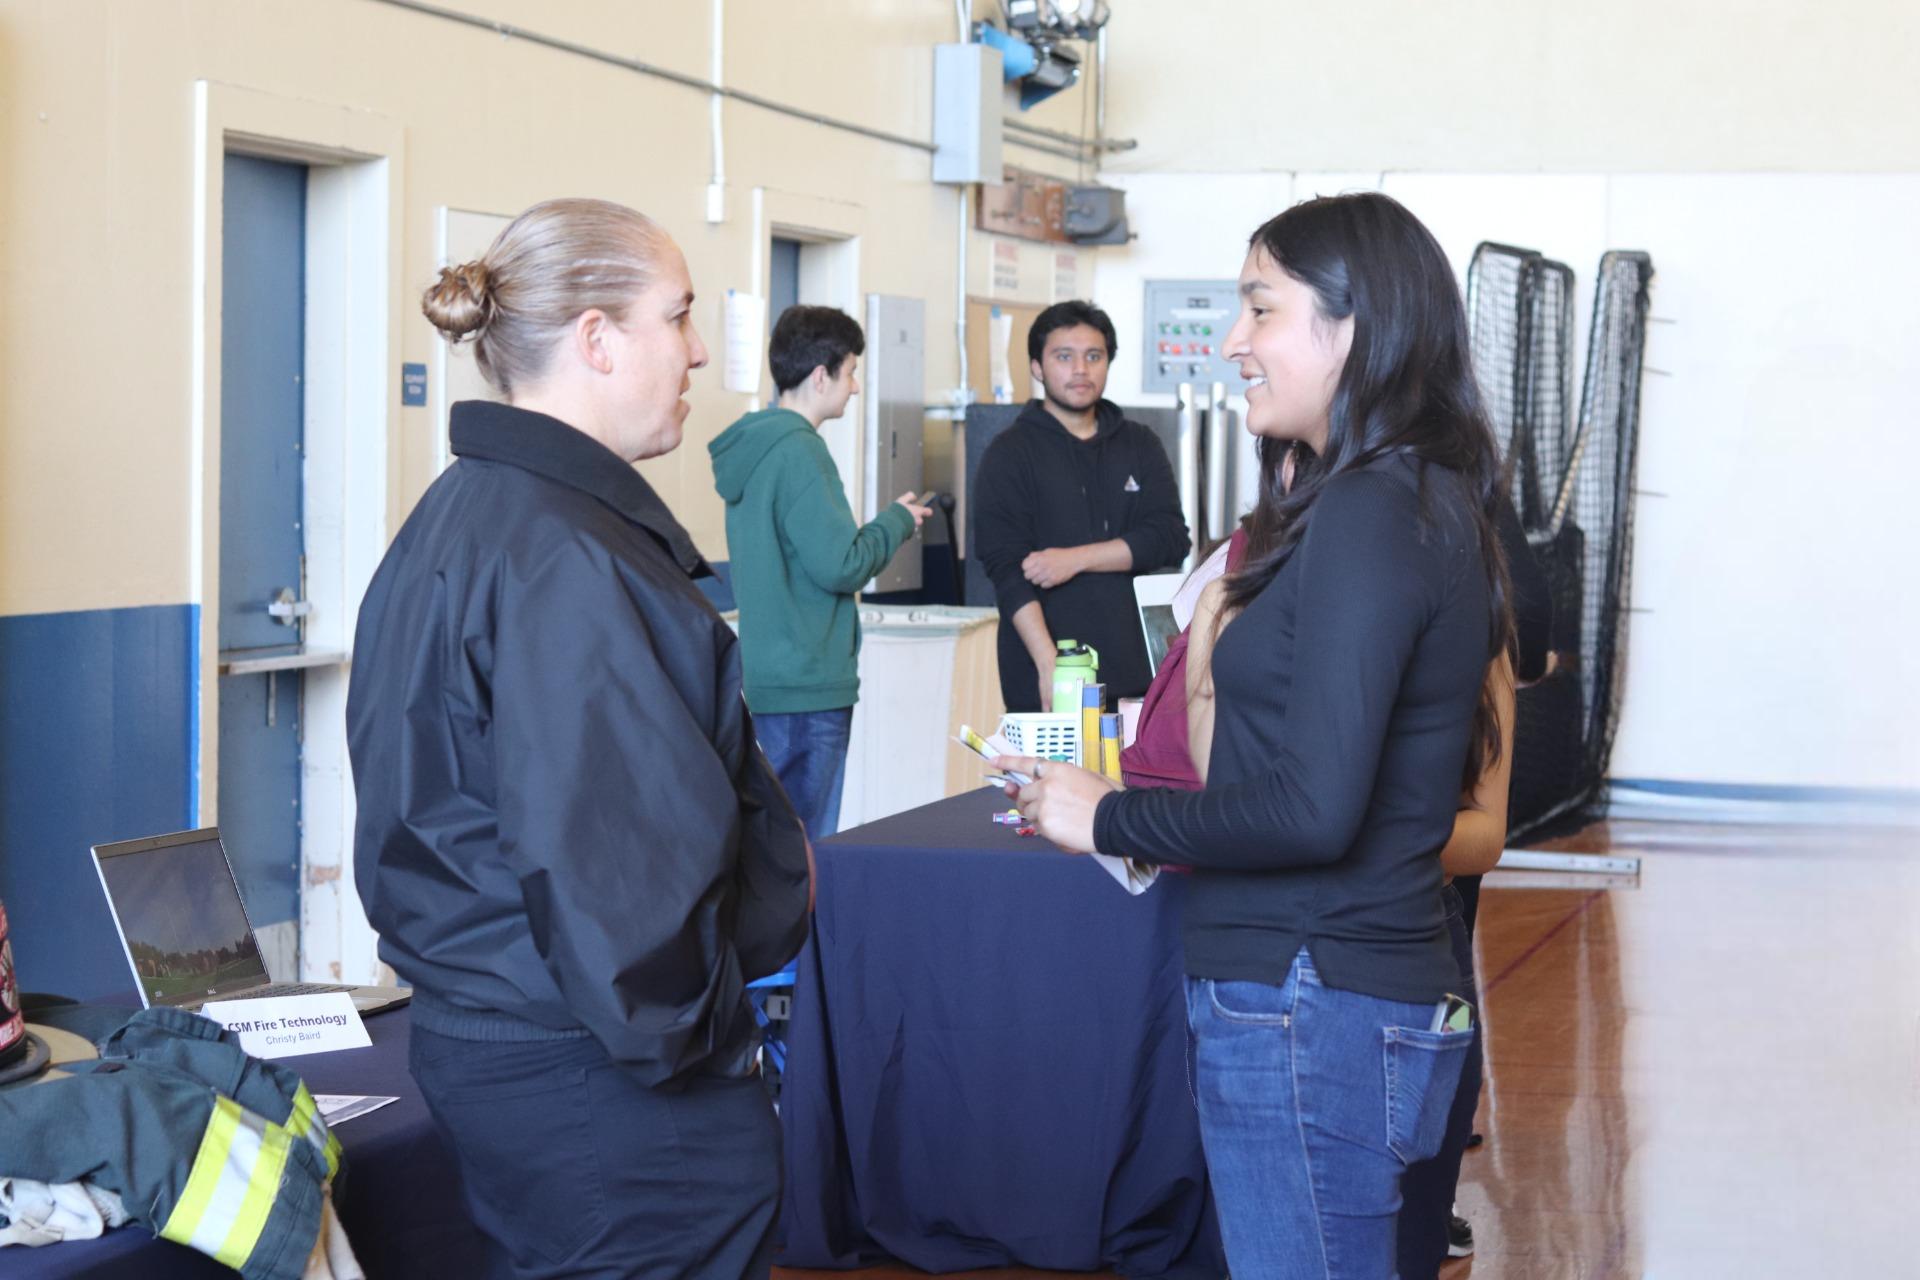 South City High students learn about careers that do not involve college at the school's career technical education (CTE) fair.